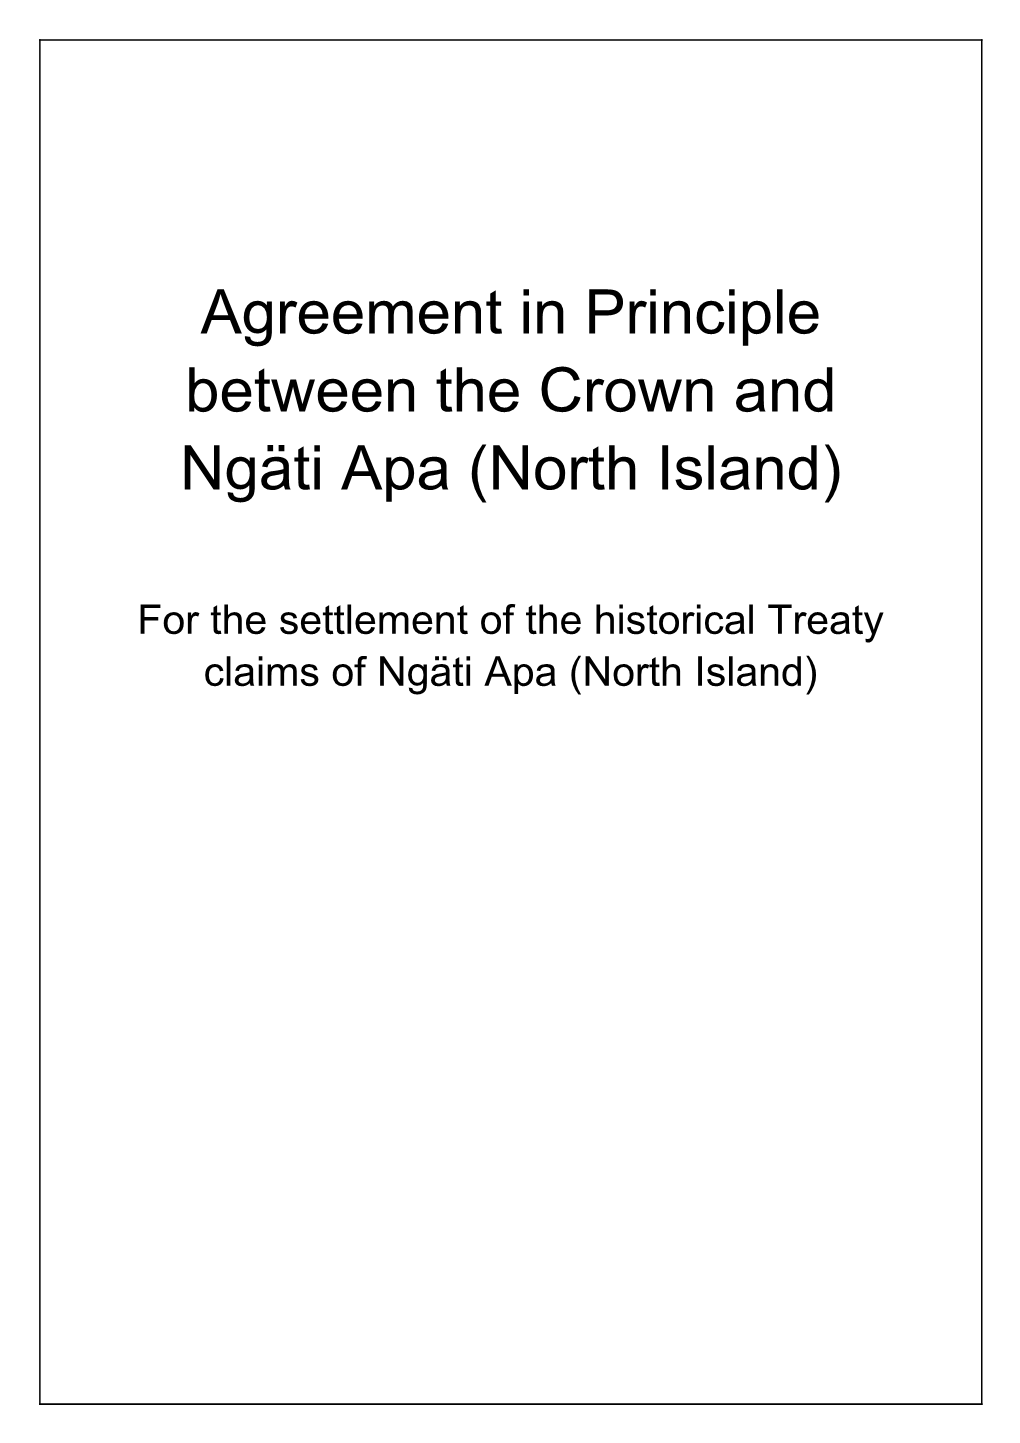 Agreement in Principle Between the Crown and Ngäti Apa (North Island)